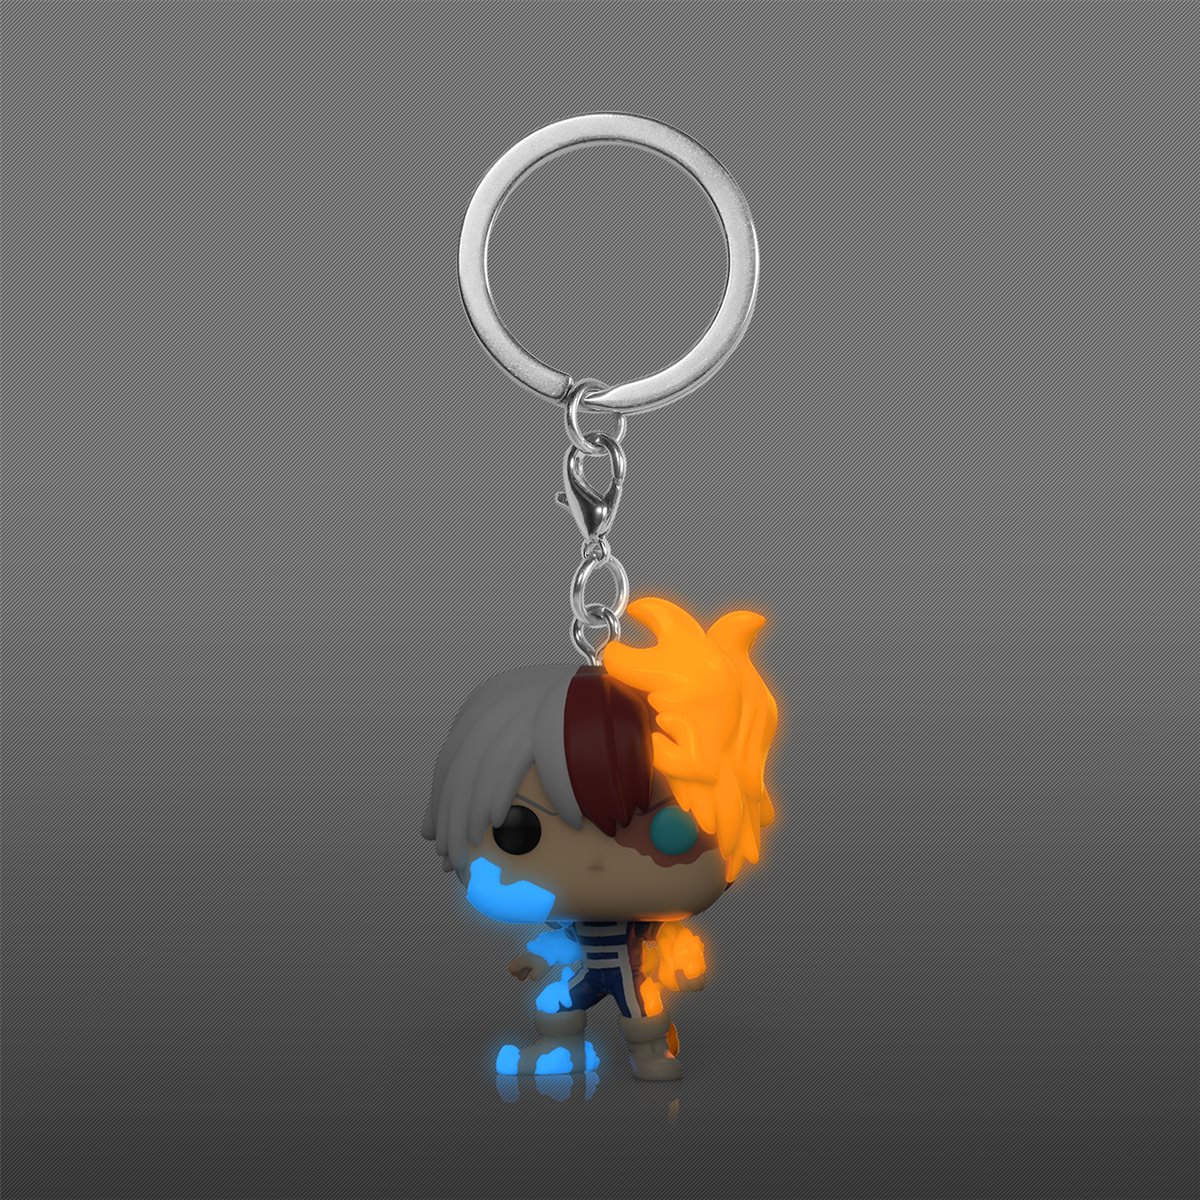 Keychain with Saitama Funko POP from the anime series OnePunch Man  Keychain made of vinyl material   Saitama one punch man One punch man  Saitama one punch